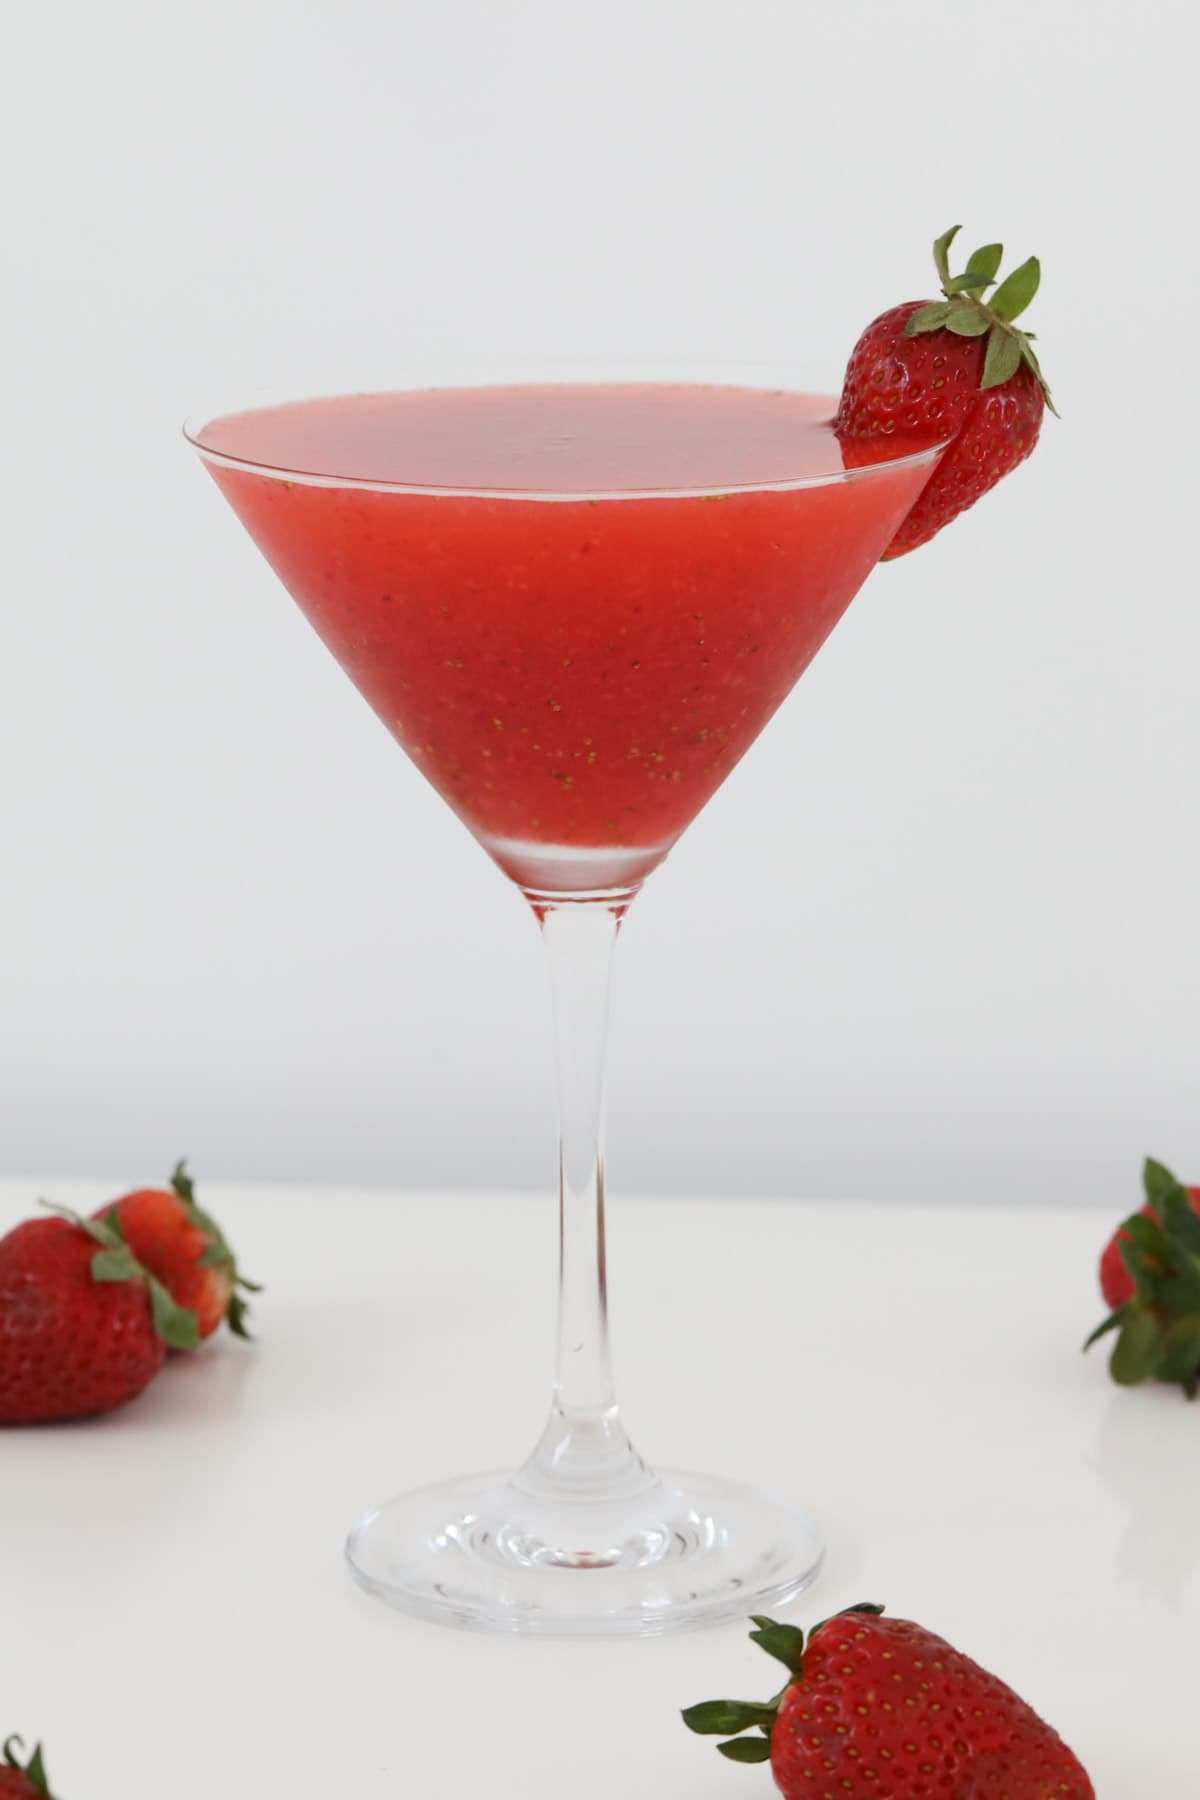 A martini glass filled with pureeed strawberry and vodka, then decorated with fresh strawberry.